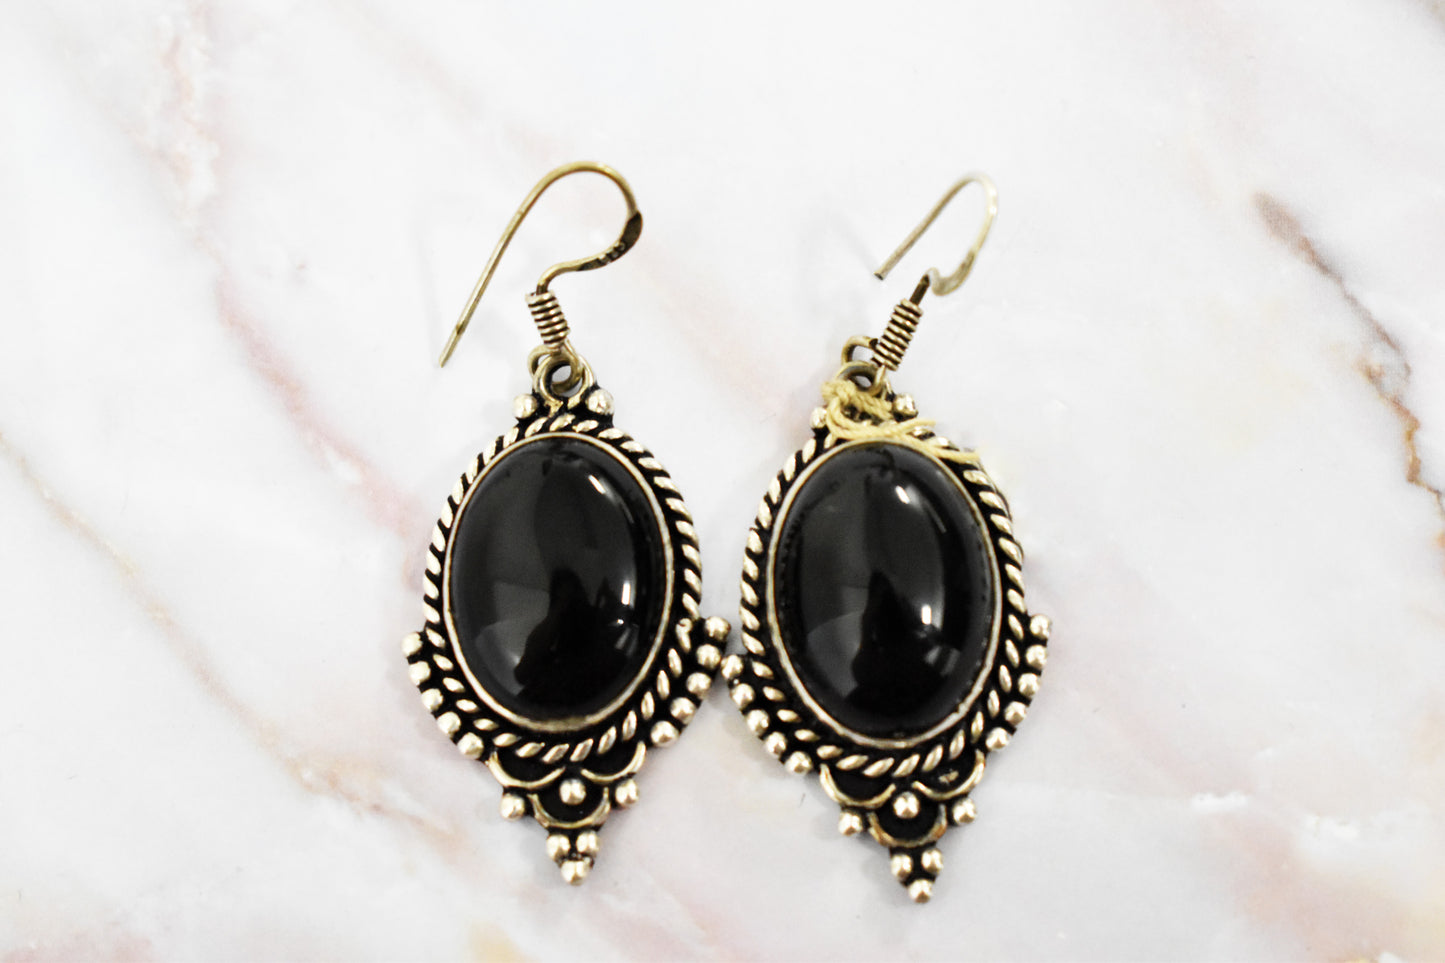 stones-of-transformation - Onyx Earrings - Stones of Transformation - 